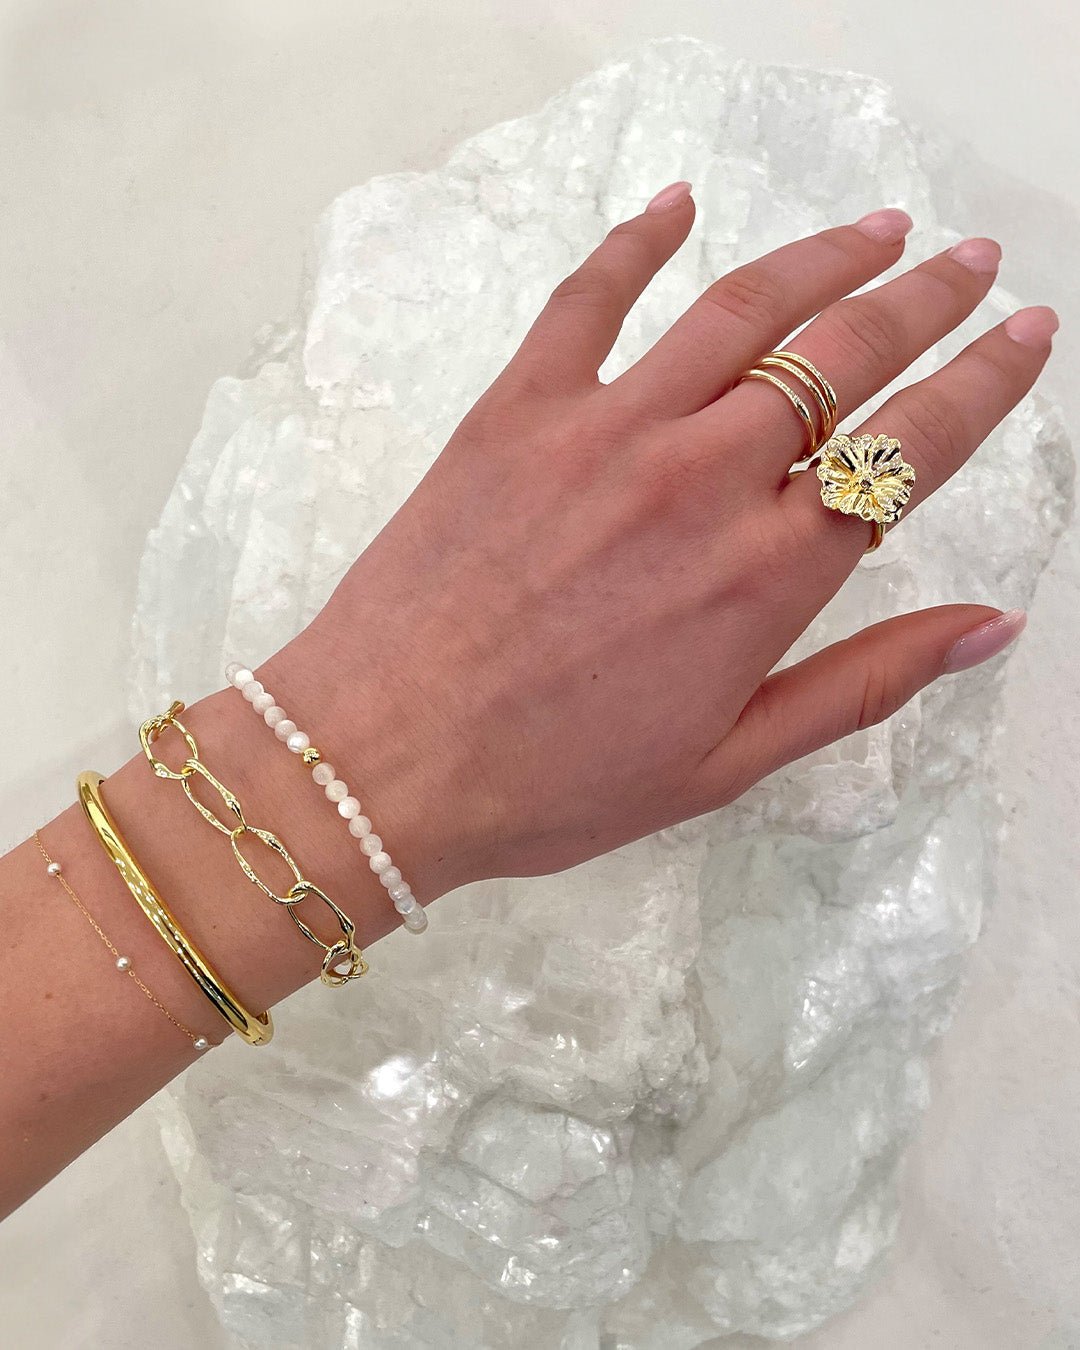 Stylist wearing gold plated and gemstone bracelets and rings